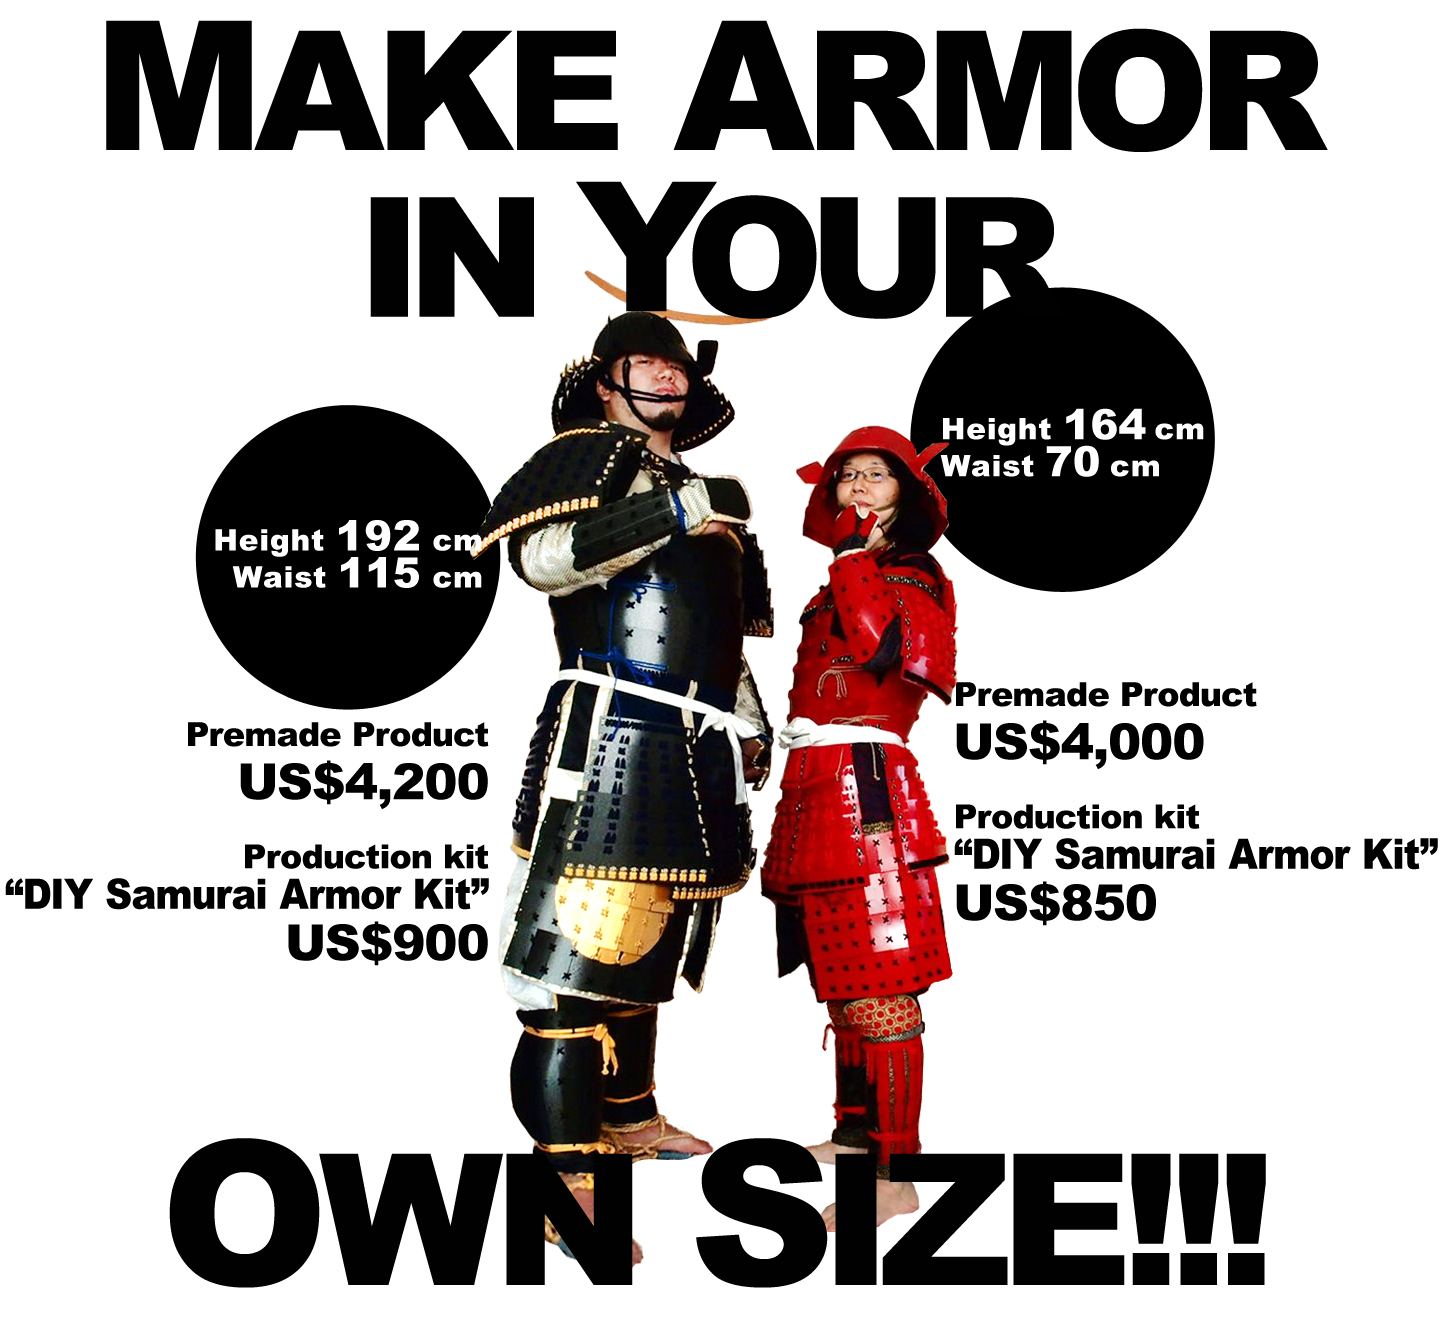 make armor in your own size